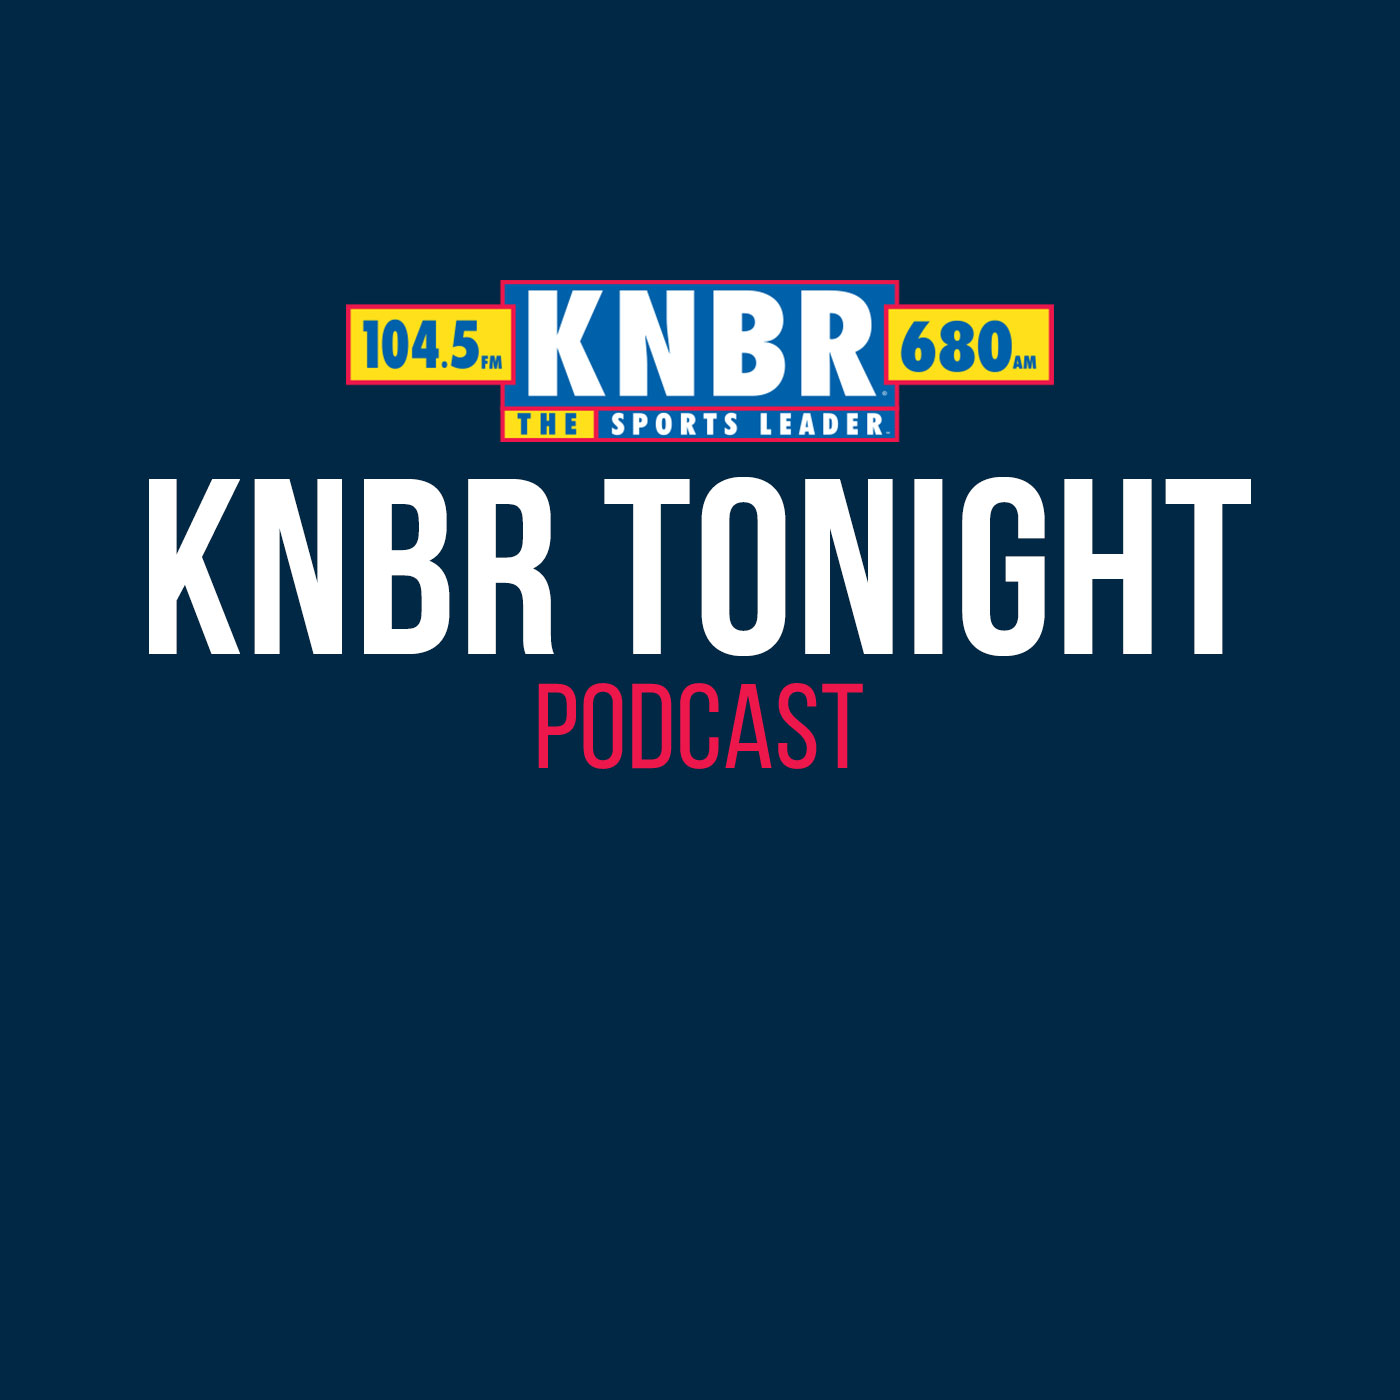 3-4 Brian Peacock joins KNBR Tonight with Dieter to discuss what's the hold up on the 49ers trading Jimmy G